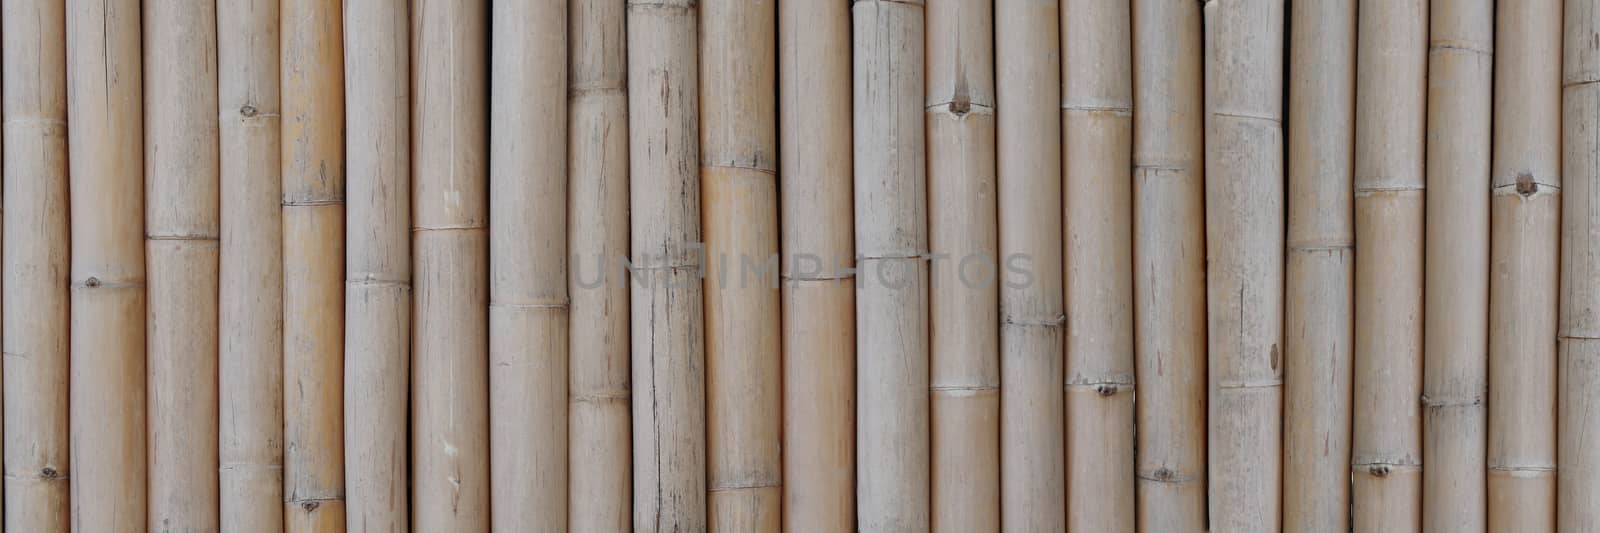 Dry brown bamboo banner pattern background. Dry bamboo background.